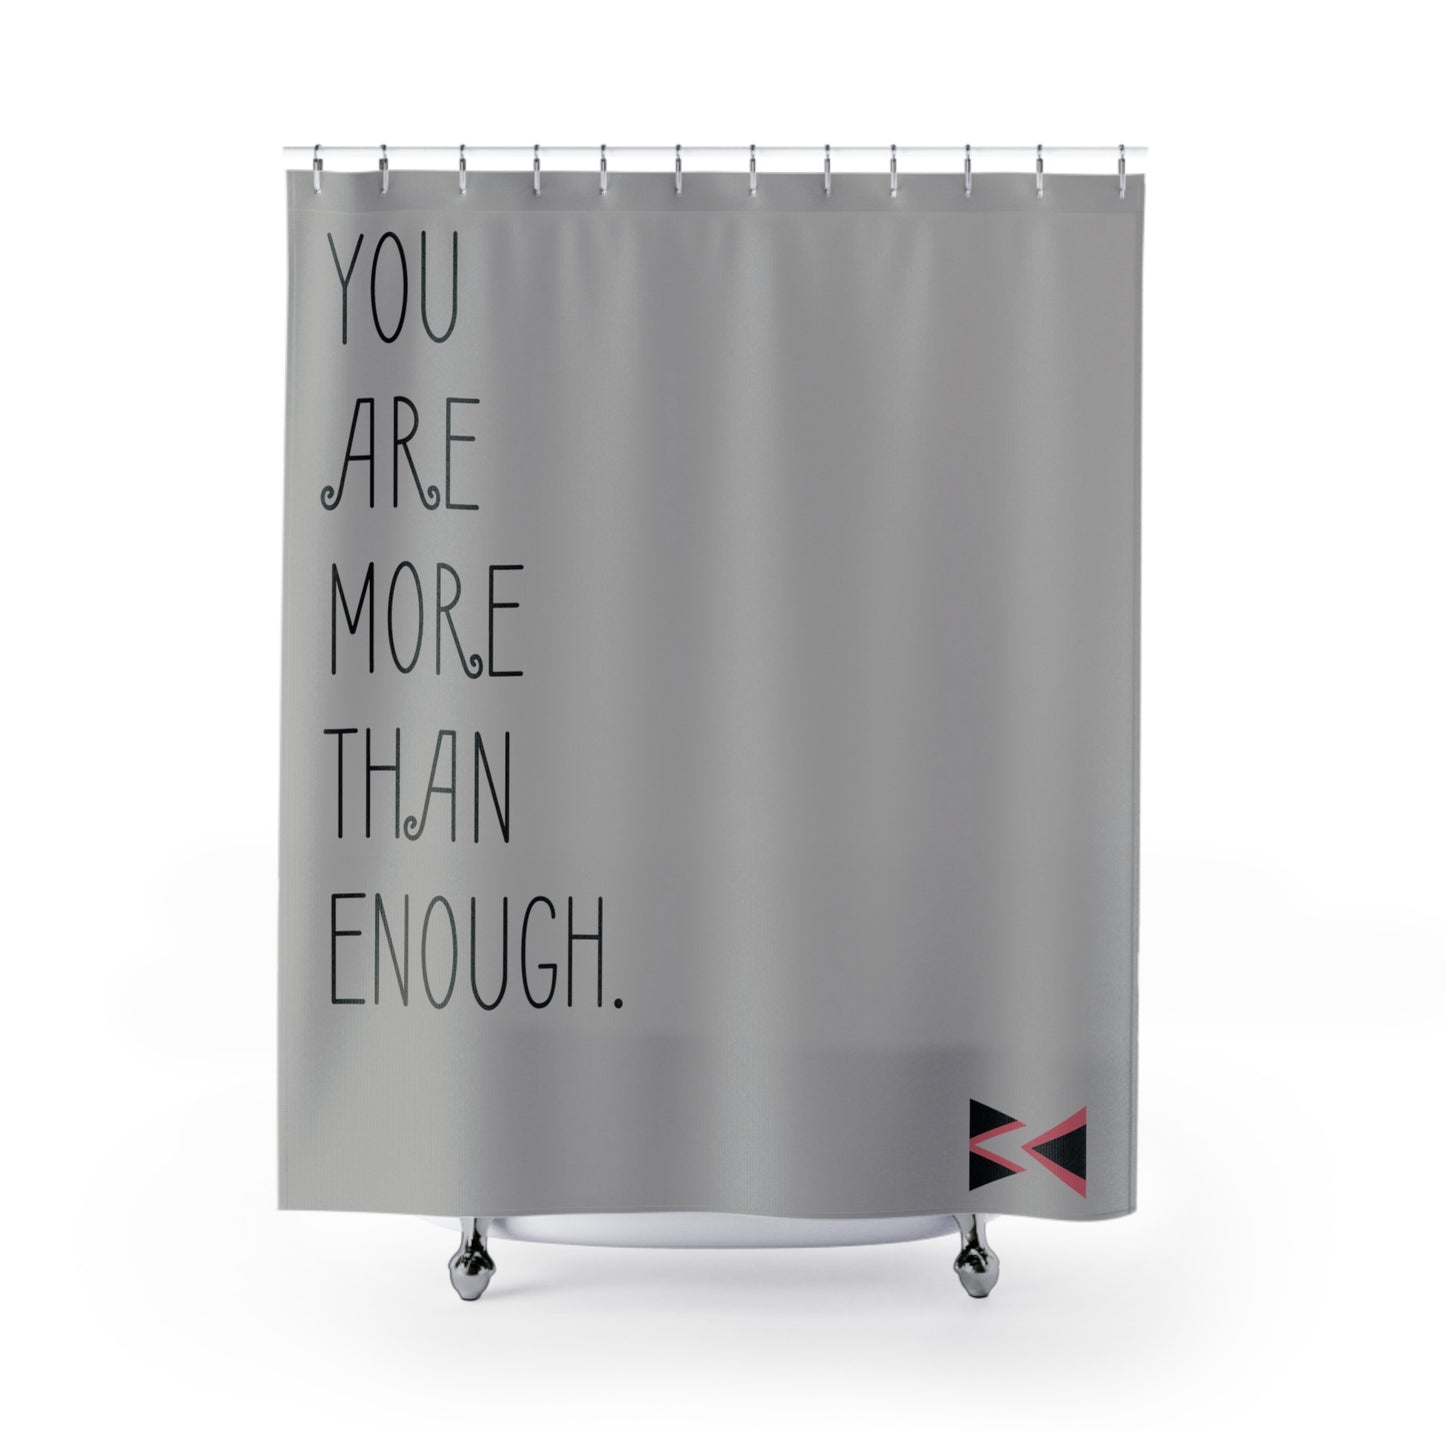 The EC Shower Curtain